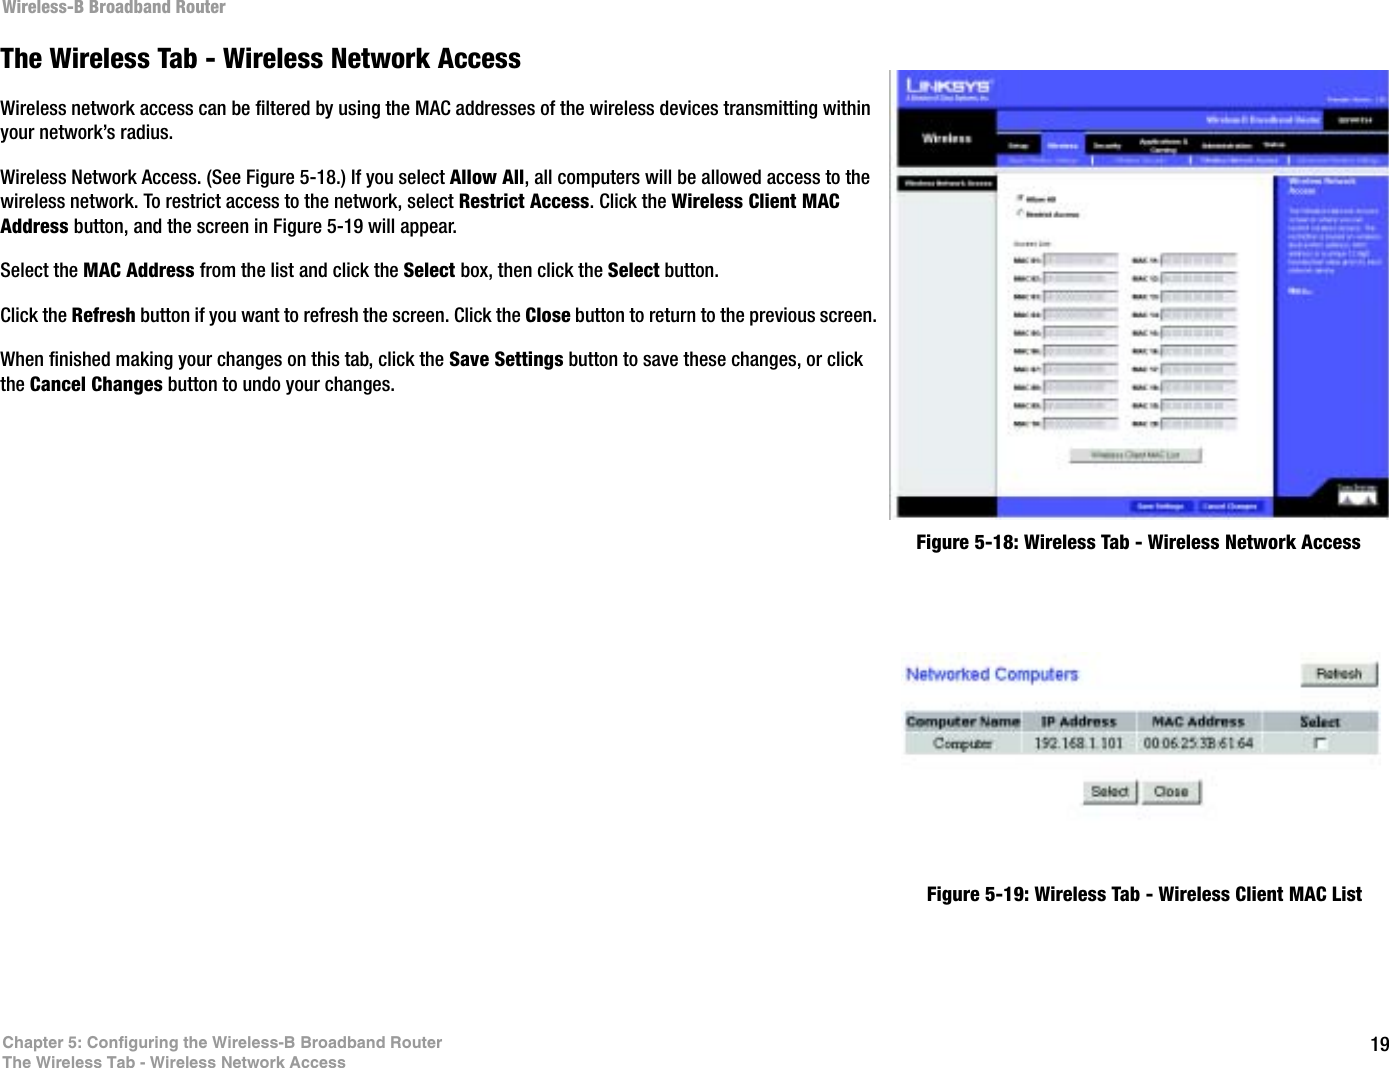 19Chapter 5: Configuring the Wireless-B Broadband RouterThe Wireless Tab - Wireless Network AccessWireless-B Broadband RouterThe Wireless Tab - Wireless Network AccessWireless network access can be filtered by using the MAC addresses of the wireless devices transmitting within your network’s radius.Wireless Network Access. (See Figure 5-18.) If you select Allow All, all computers will be allowed access to the wireless network. To restrict access to the network, select Restrict Access. Click the Wireless Client MAC Address button, and the screen in Figure 5-19 will appear. Select the MAC Address from the list and click the Select box, then click the Select button.Click the Refresh button if you want to refresh the screen. Click the Close button to return to the previous screen.When finished making your changes on this tab, click the Save Settings button to save these changes, or click the Cancel Changes button to undo your changes. Figure 5-18: Wireless Tab - Wireless Network AccessFigure 5-19: Wireless Tab - Wireless Client MAC List